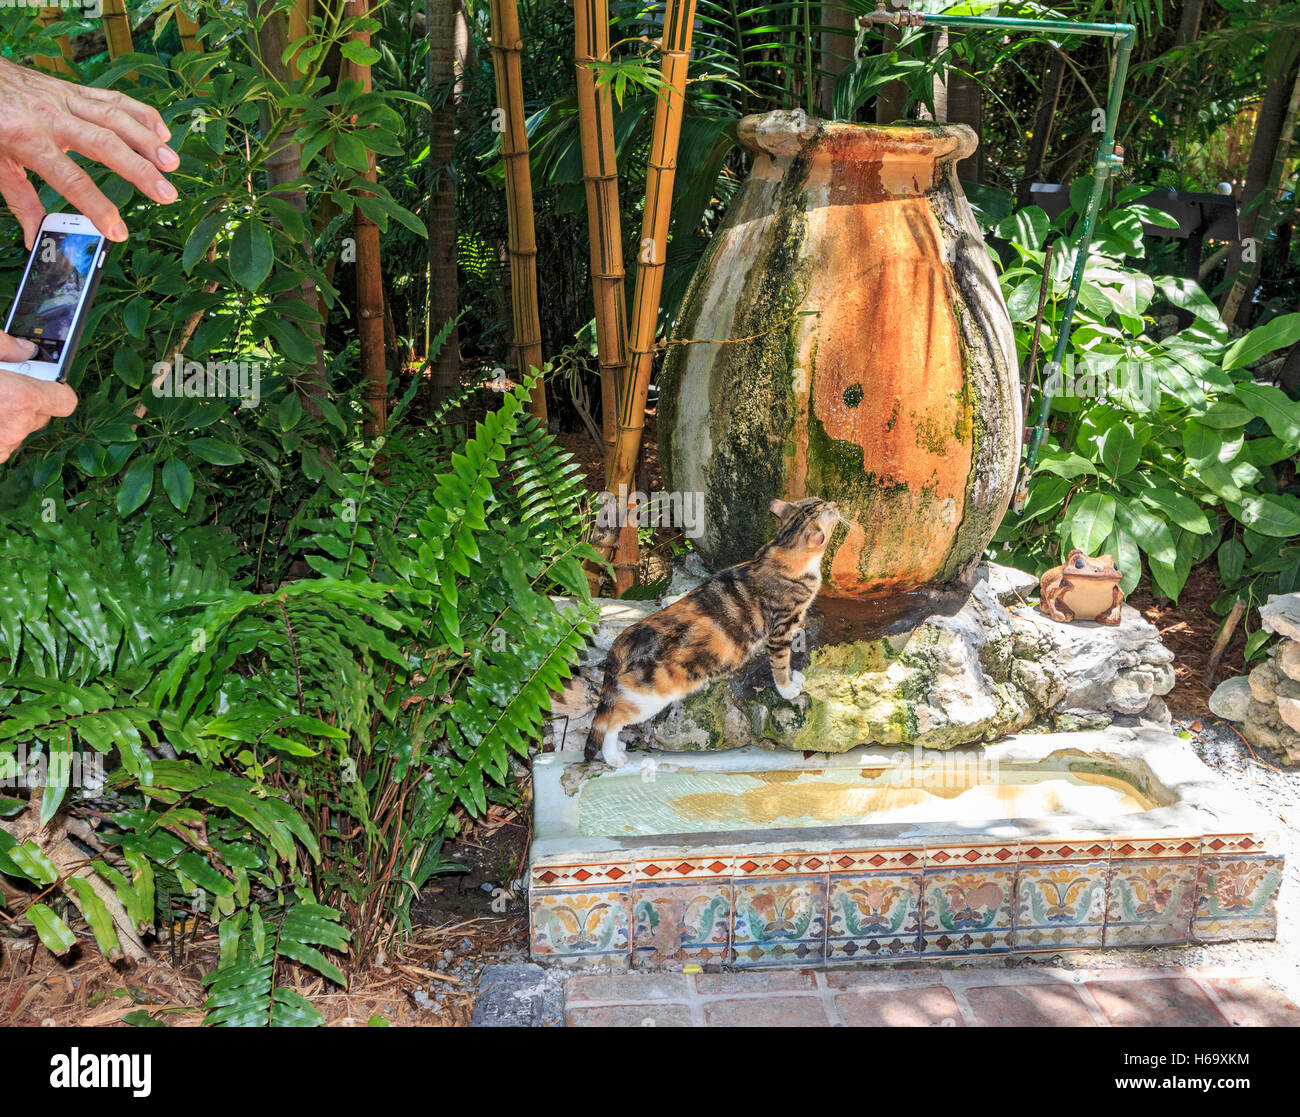 One of many six toed cats that live in the former Hemingway home, now a museum in Key West, Florida. Stock Photo